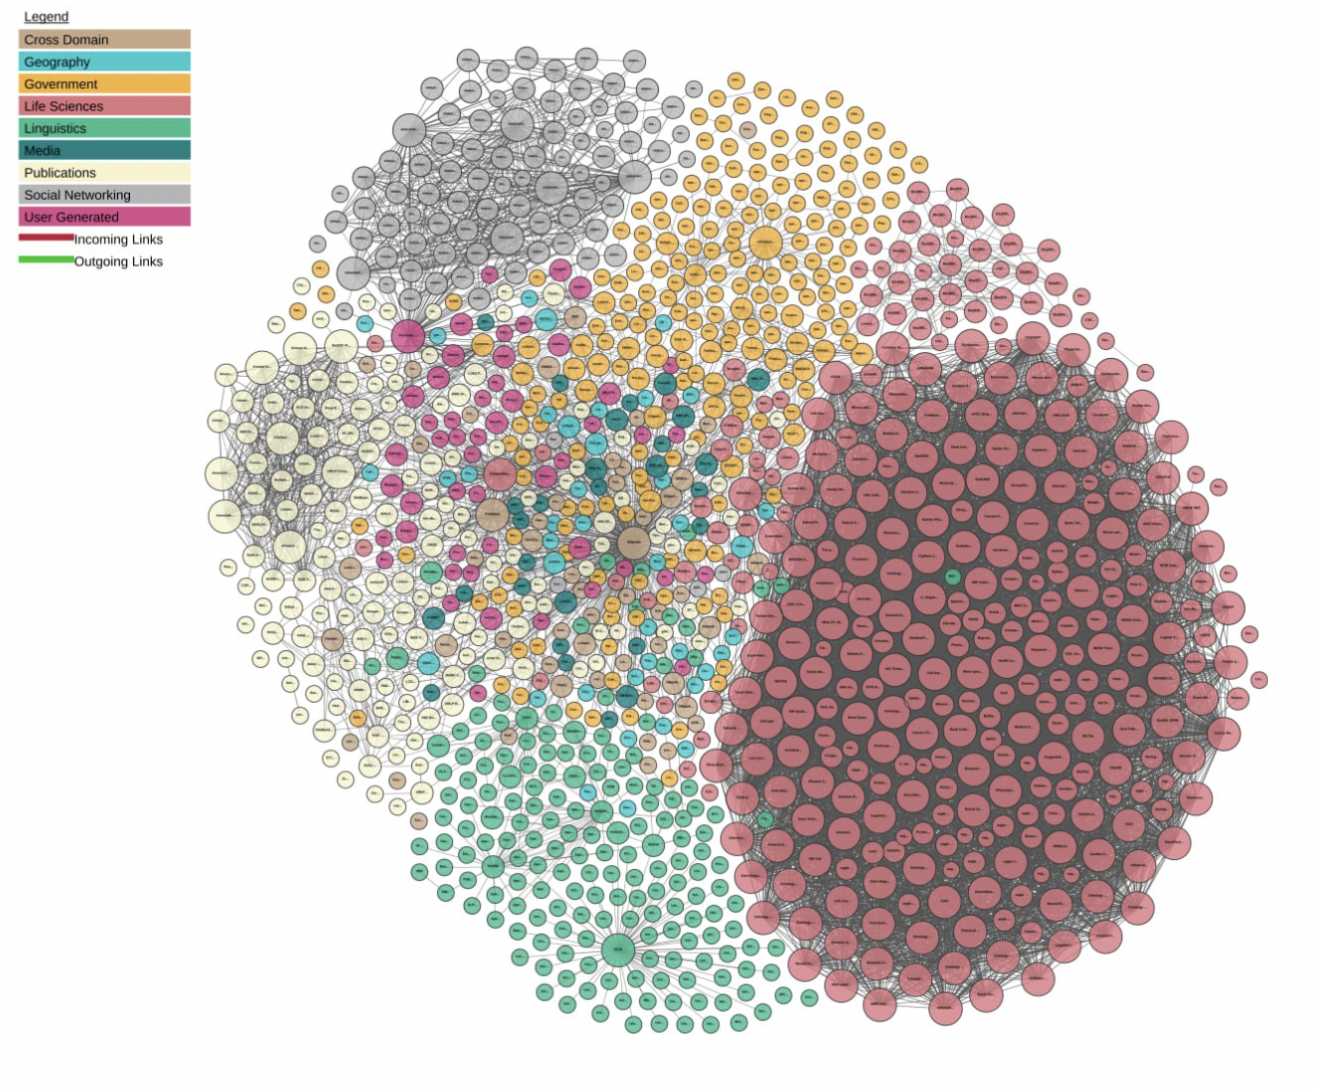 Visualization of Linked Open Data Clouds